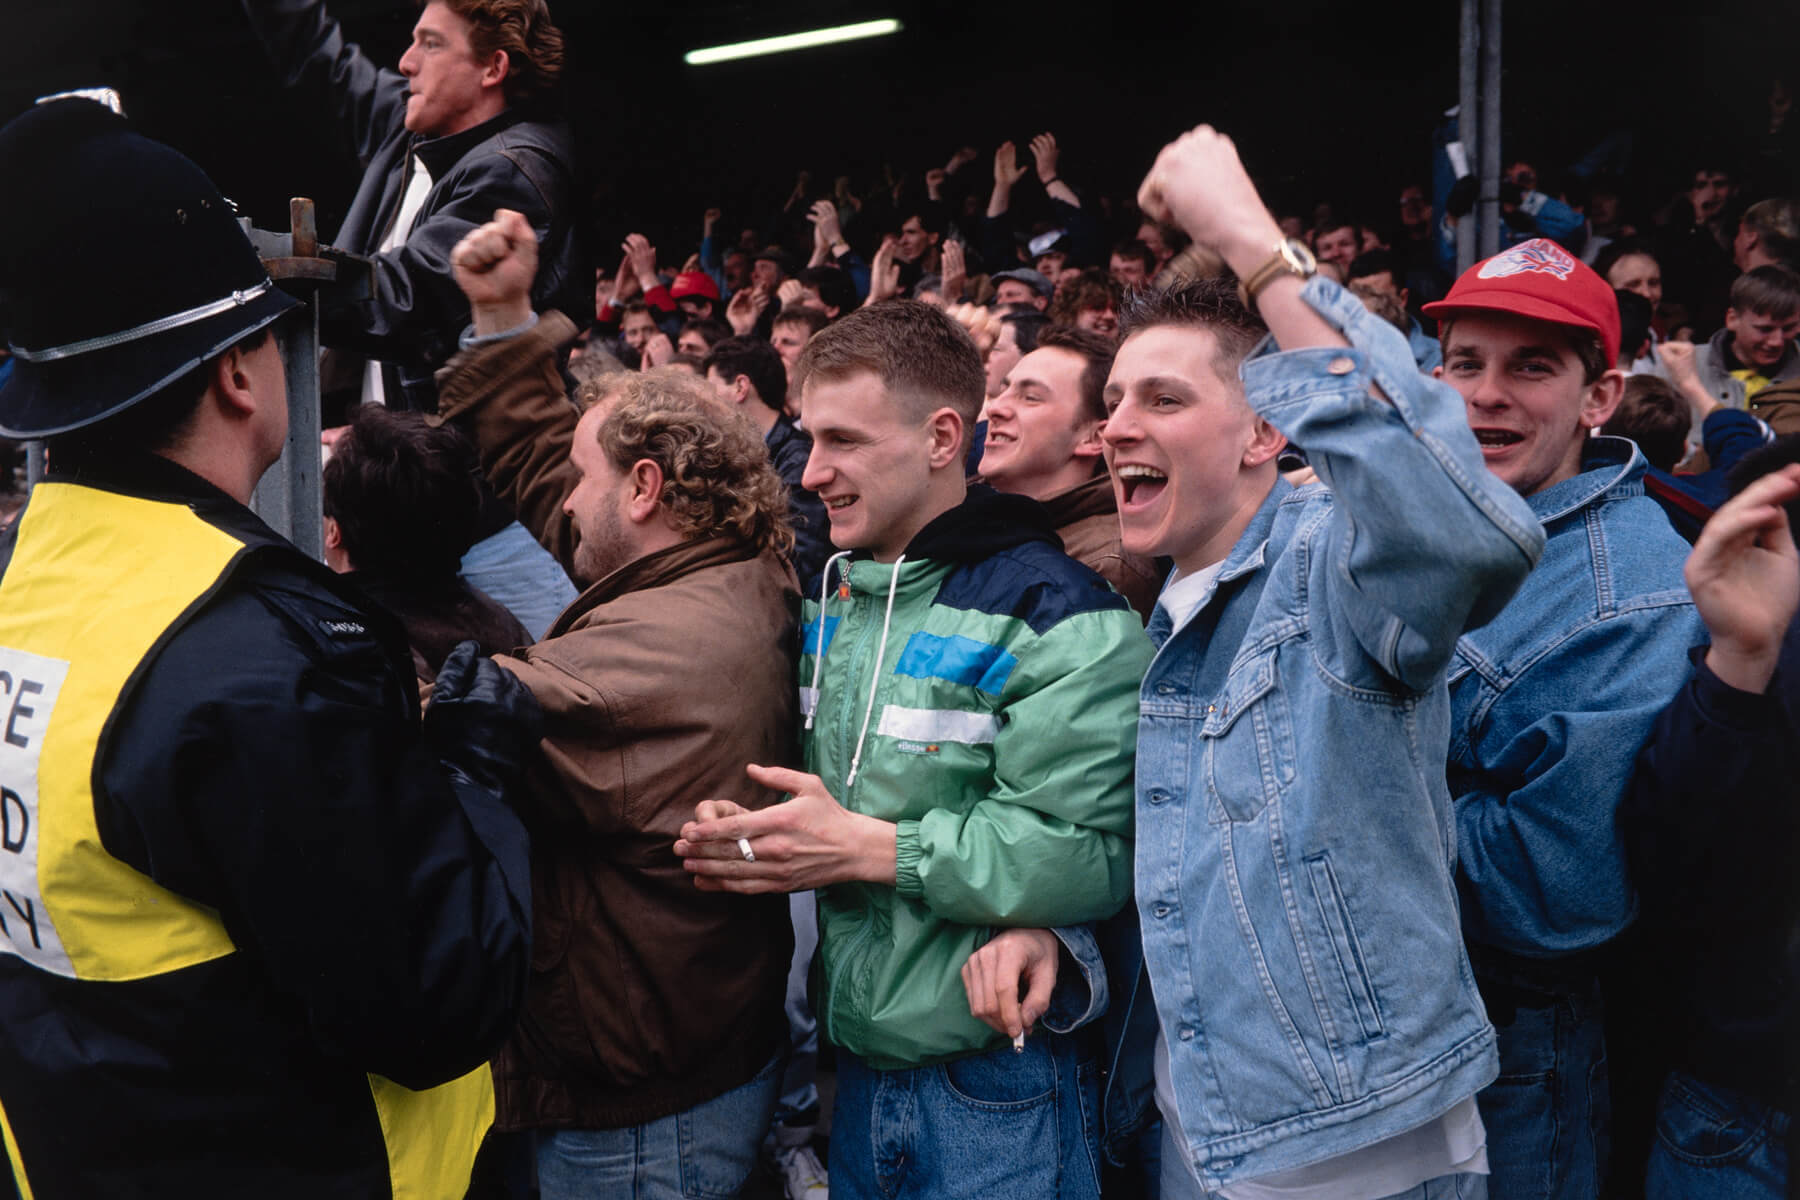 Sheffield United 1989-90 Promotion Year SU-36 United supporters euphoric as they score another goal against Bradford City